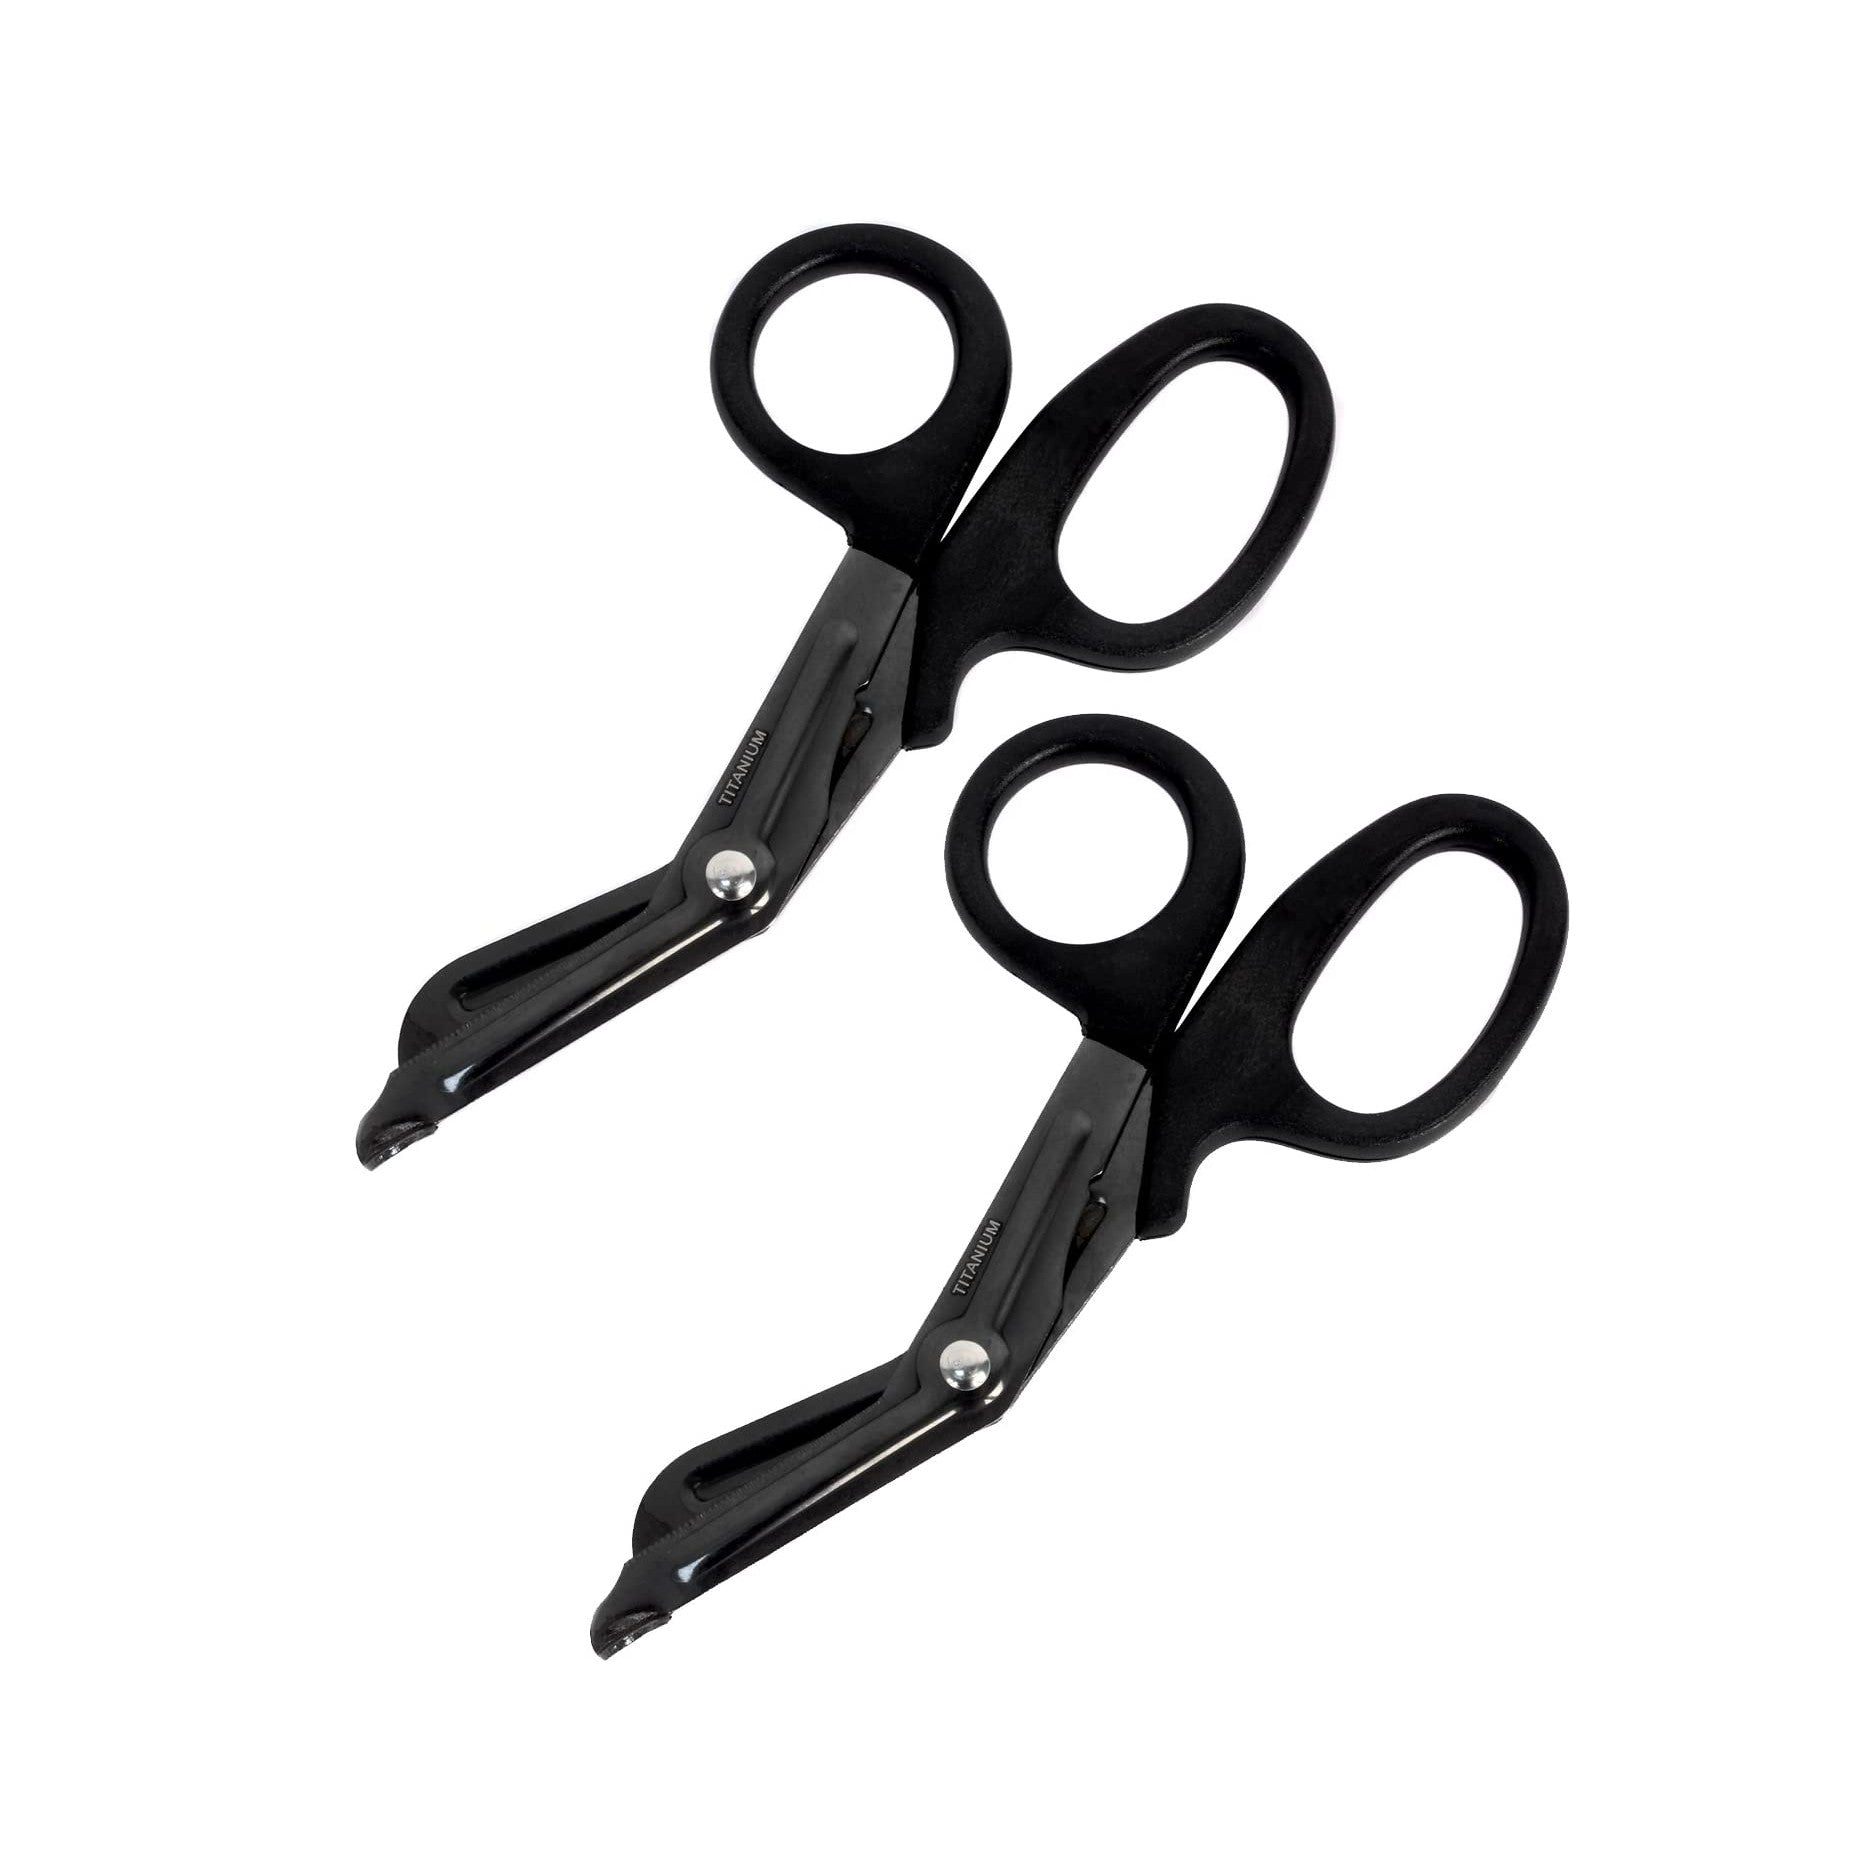 Ever Ready First Aid Titanium Bonded Bandage Shears 7 1/4" Bent, Tactical Stealth Black